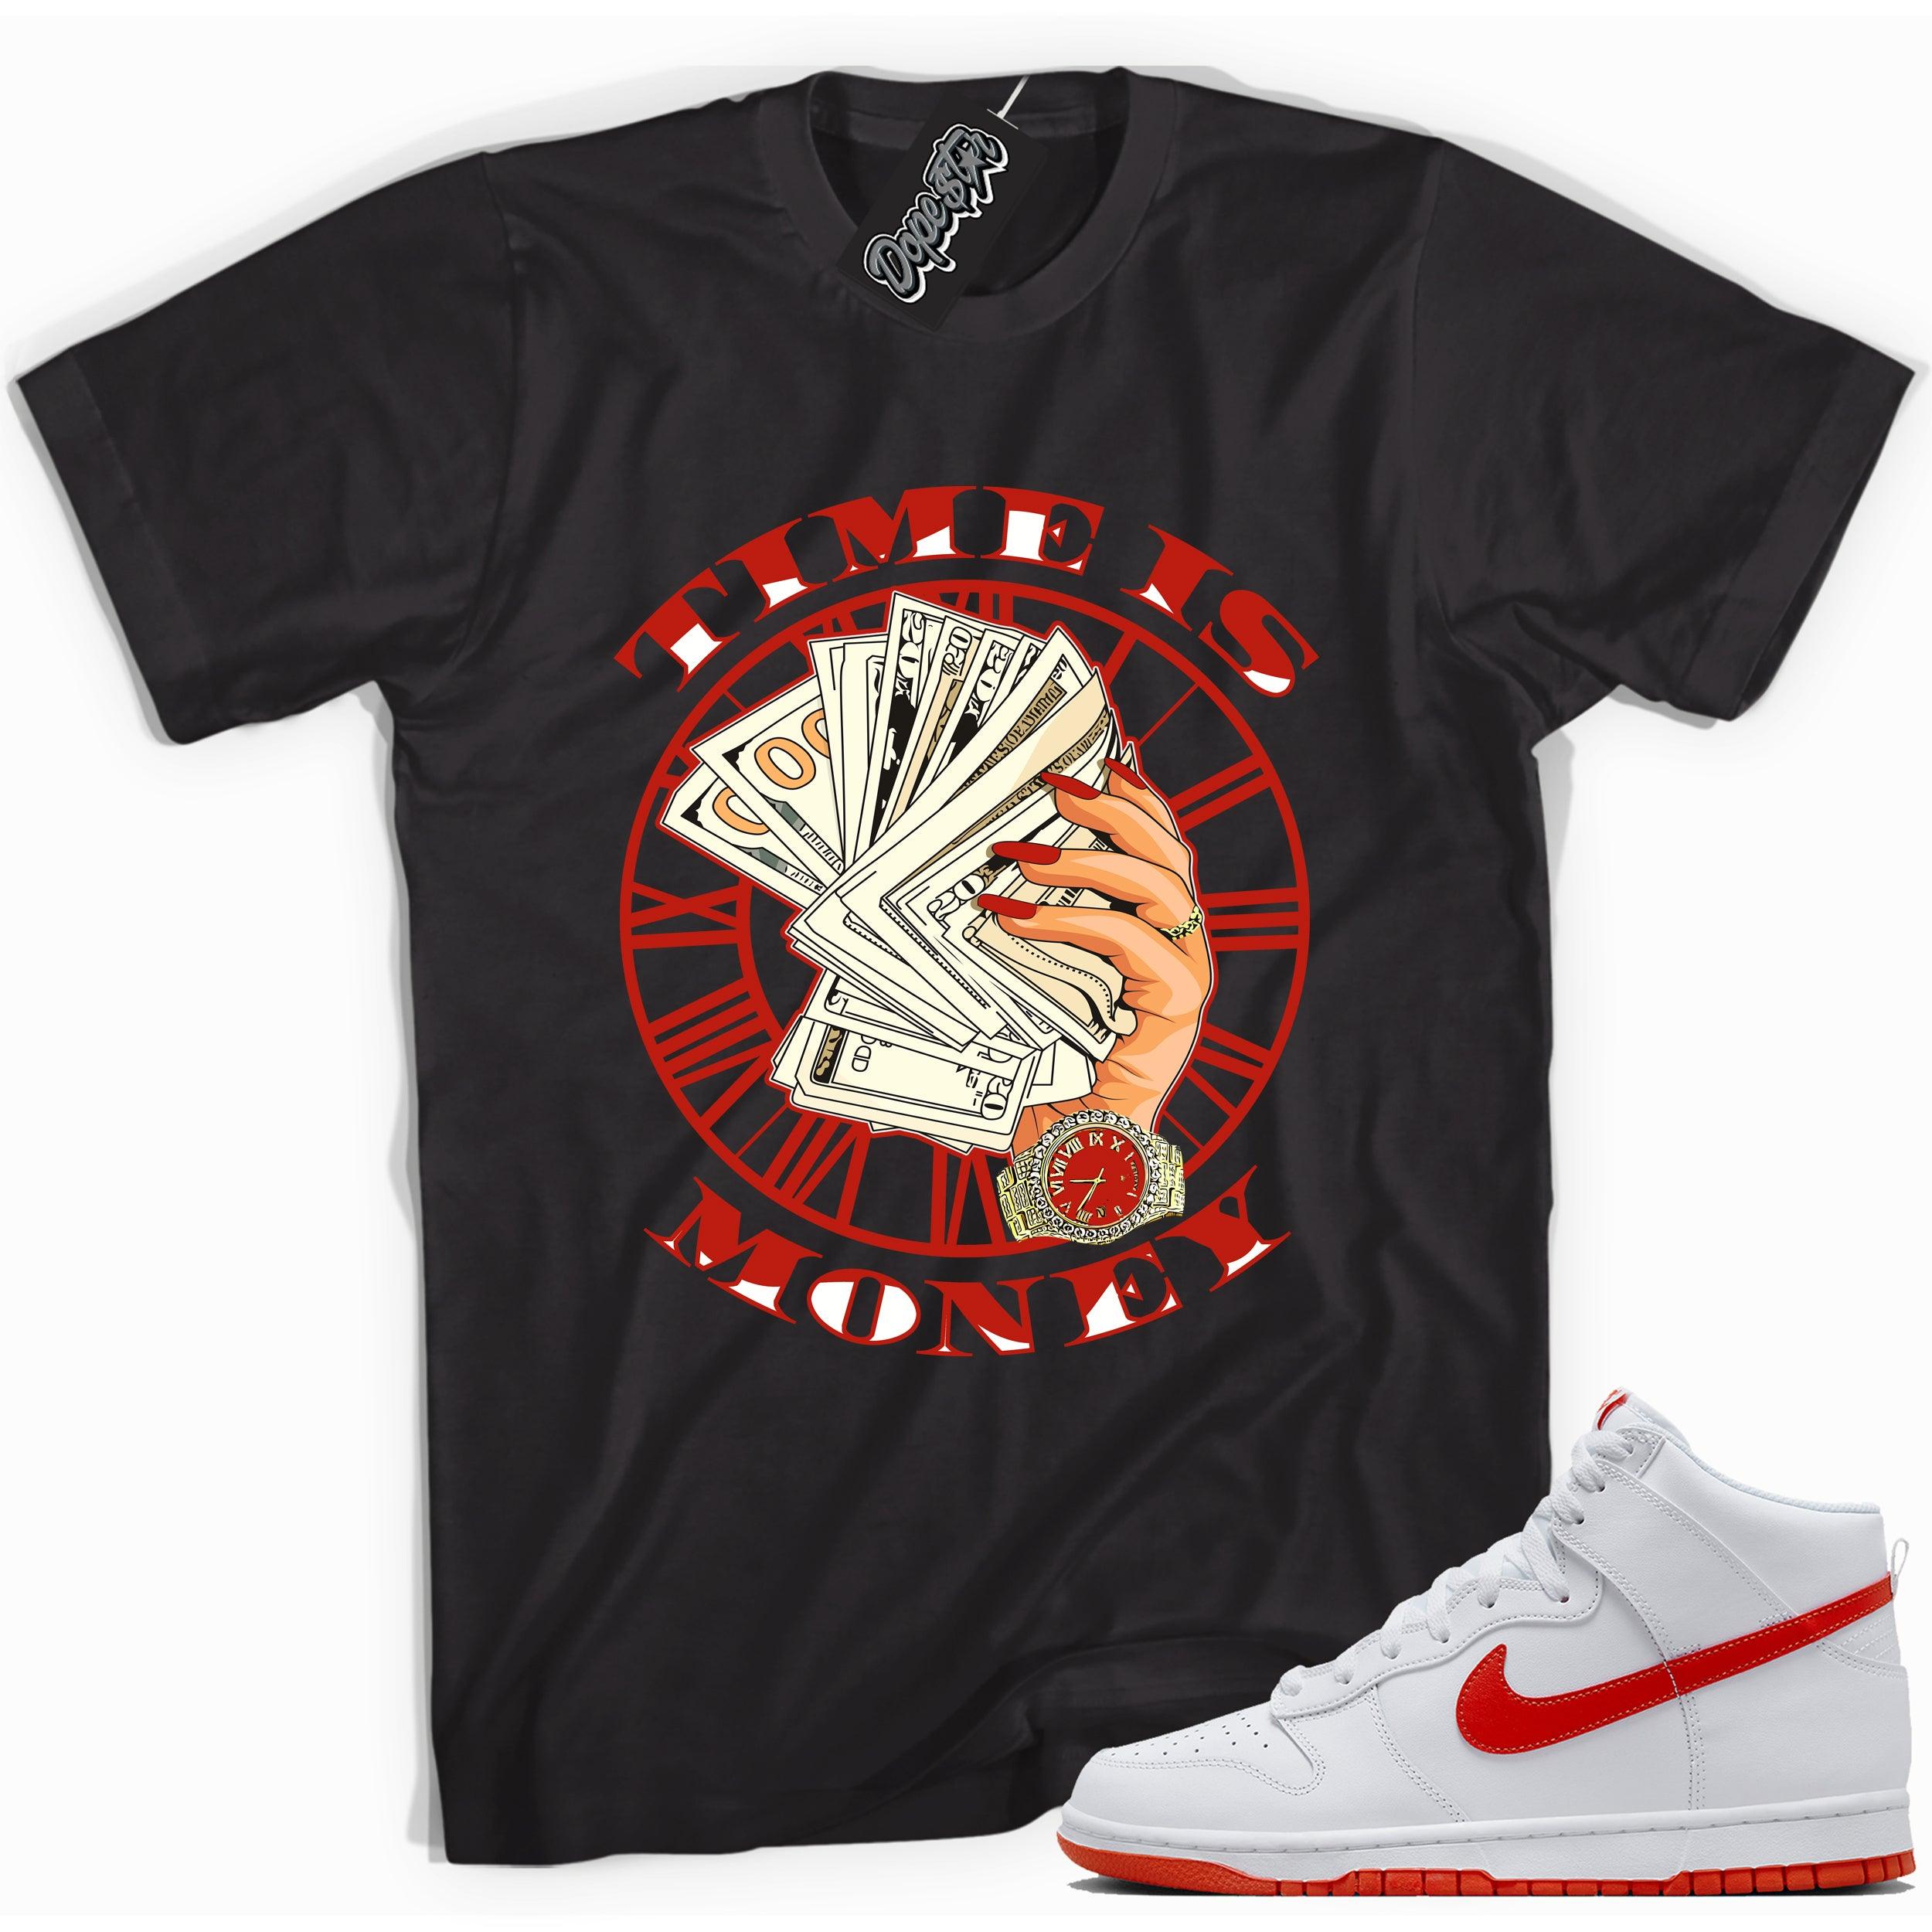 Cool black graphic tee with 'time is money' print, that perfectly matches Nike Dunk High White Picante Red sneakers.